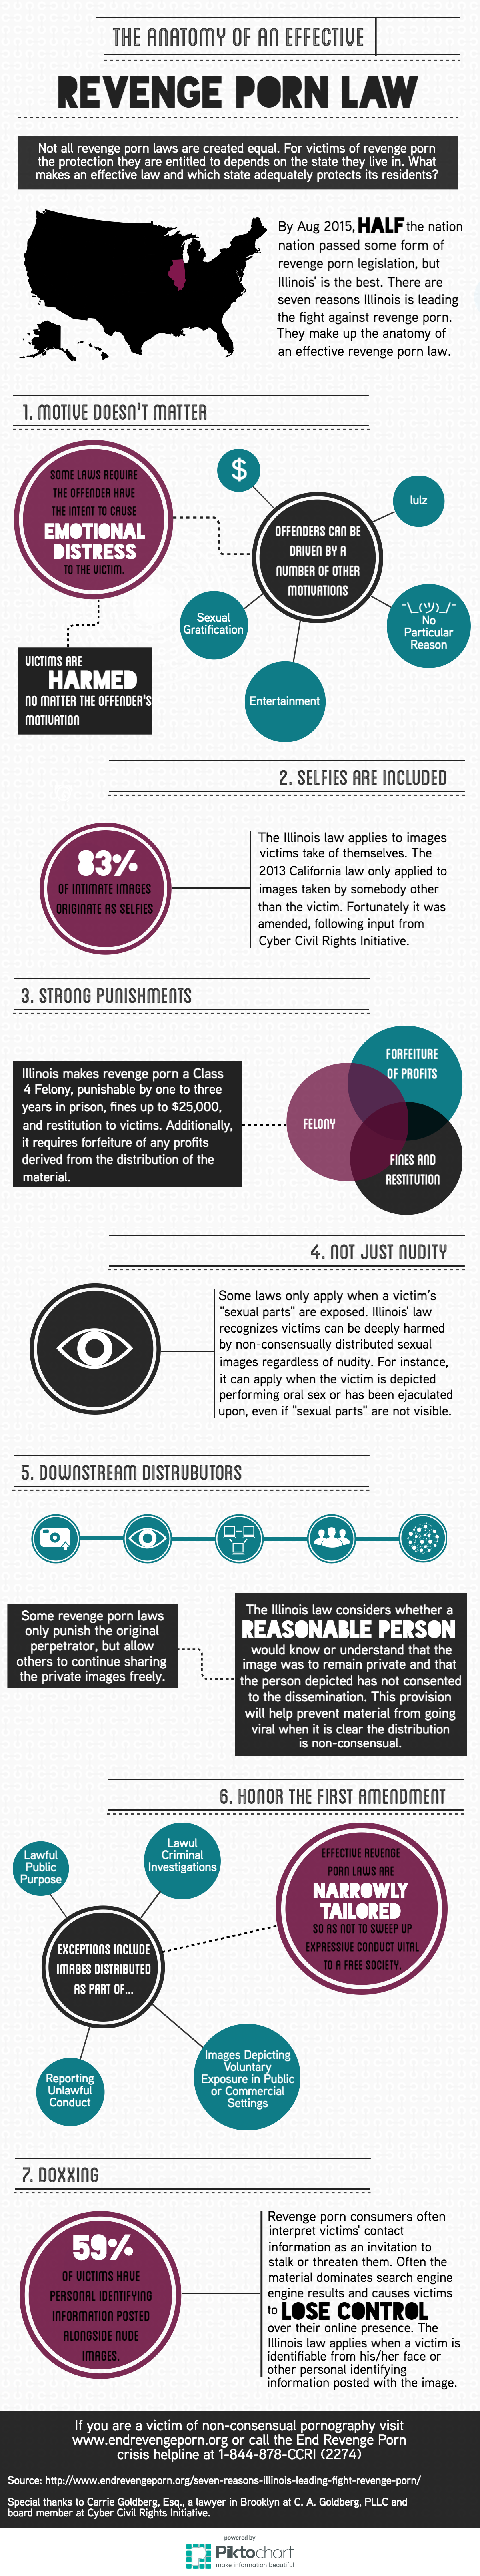 Porn Laws - Infographic: The Anatomy of an Effective Revenge Porn Law ...